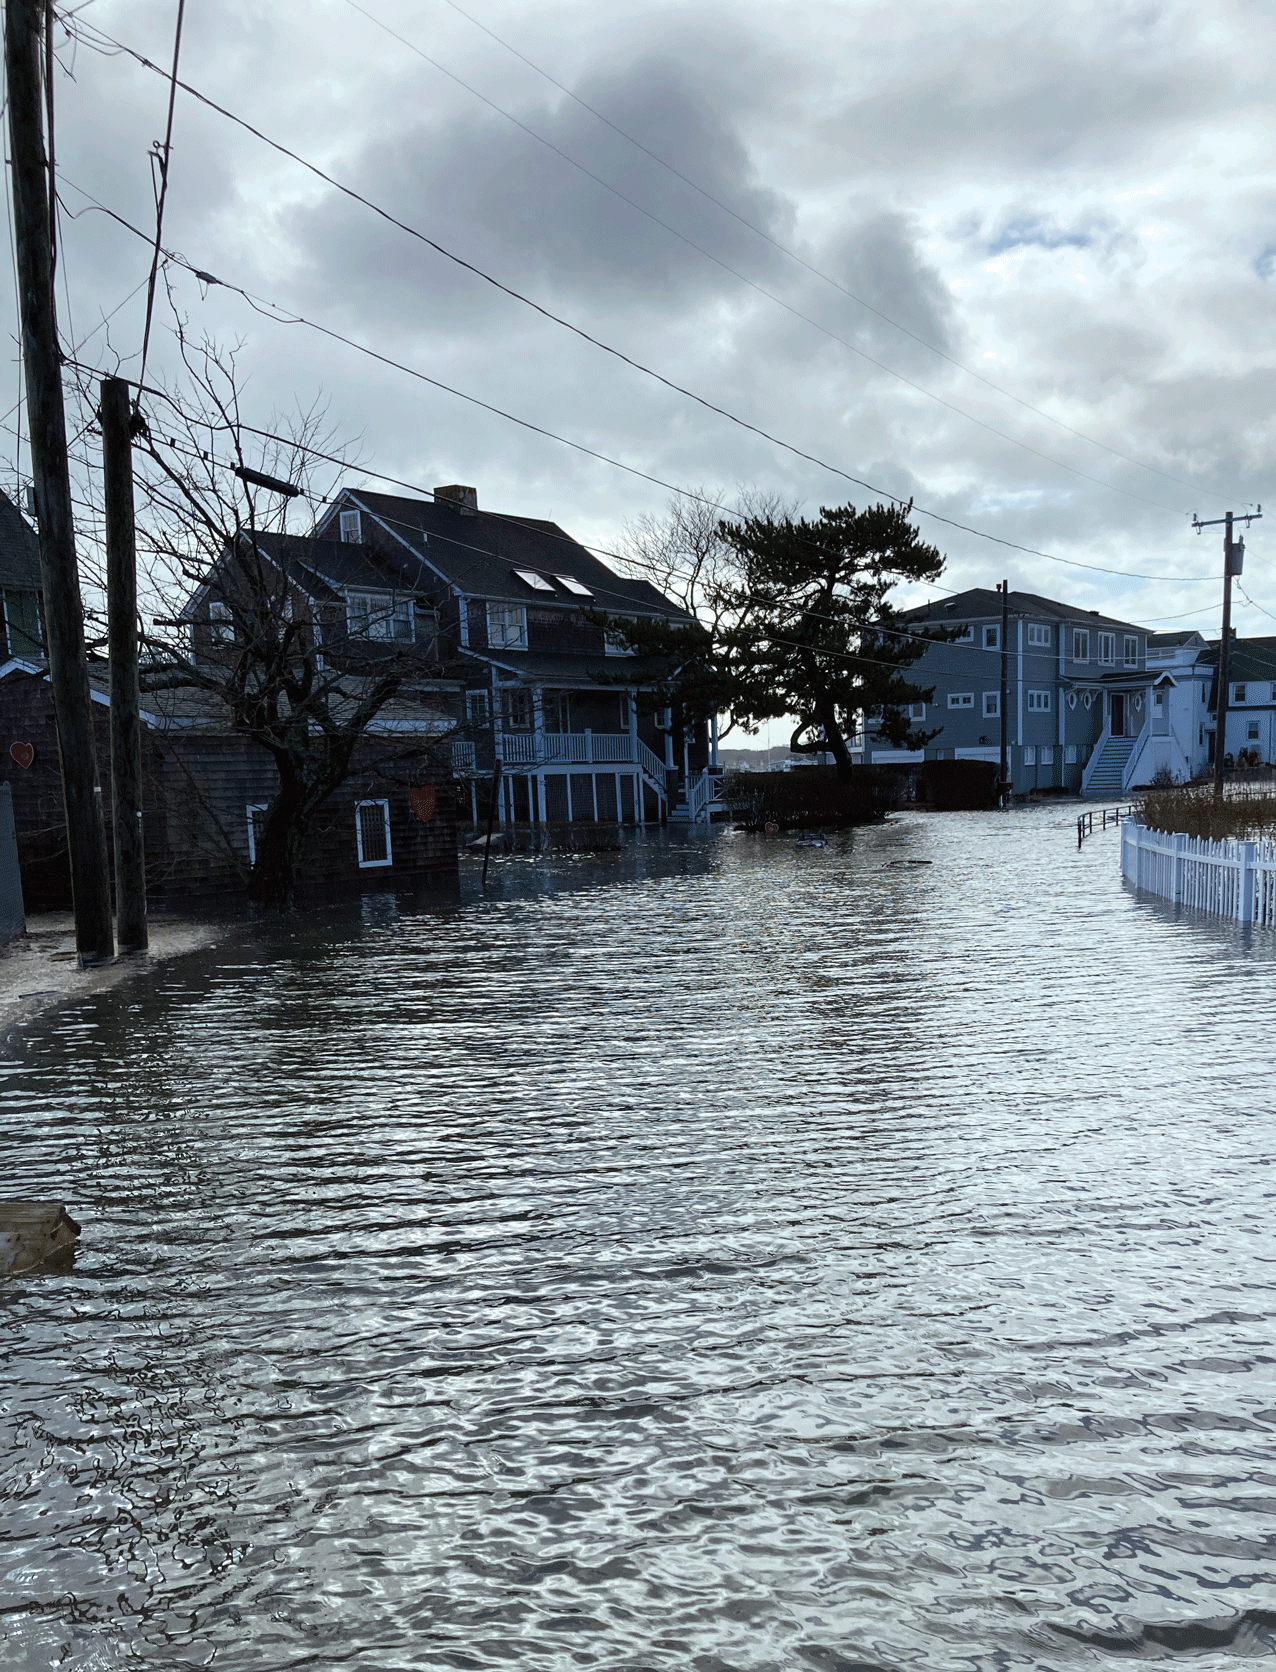 Photograph showing a flooded residential street in Niantic, Connecticut.